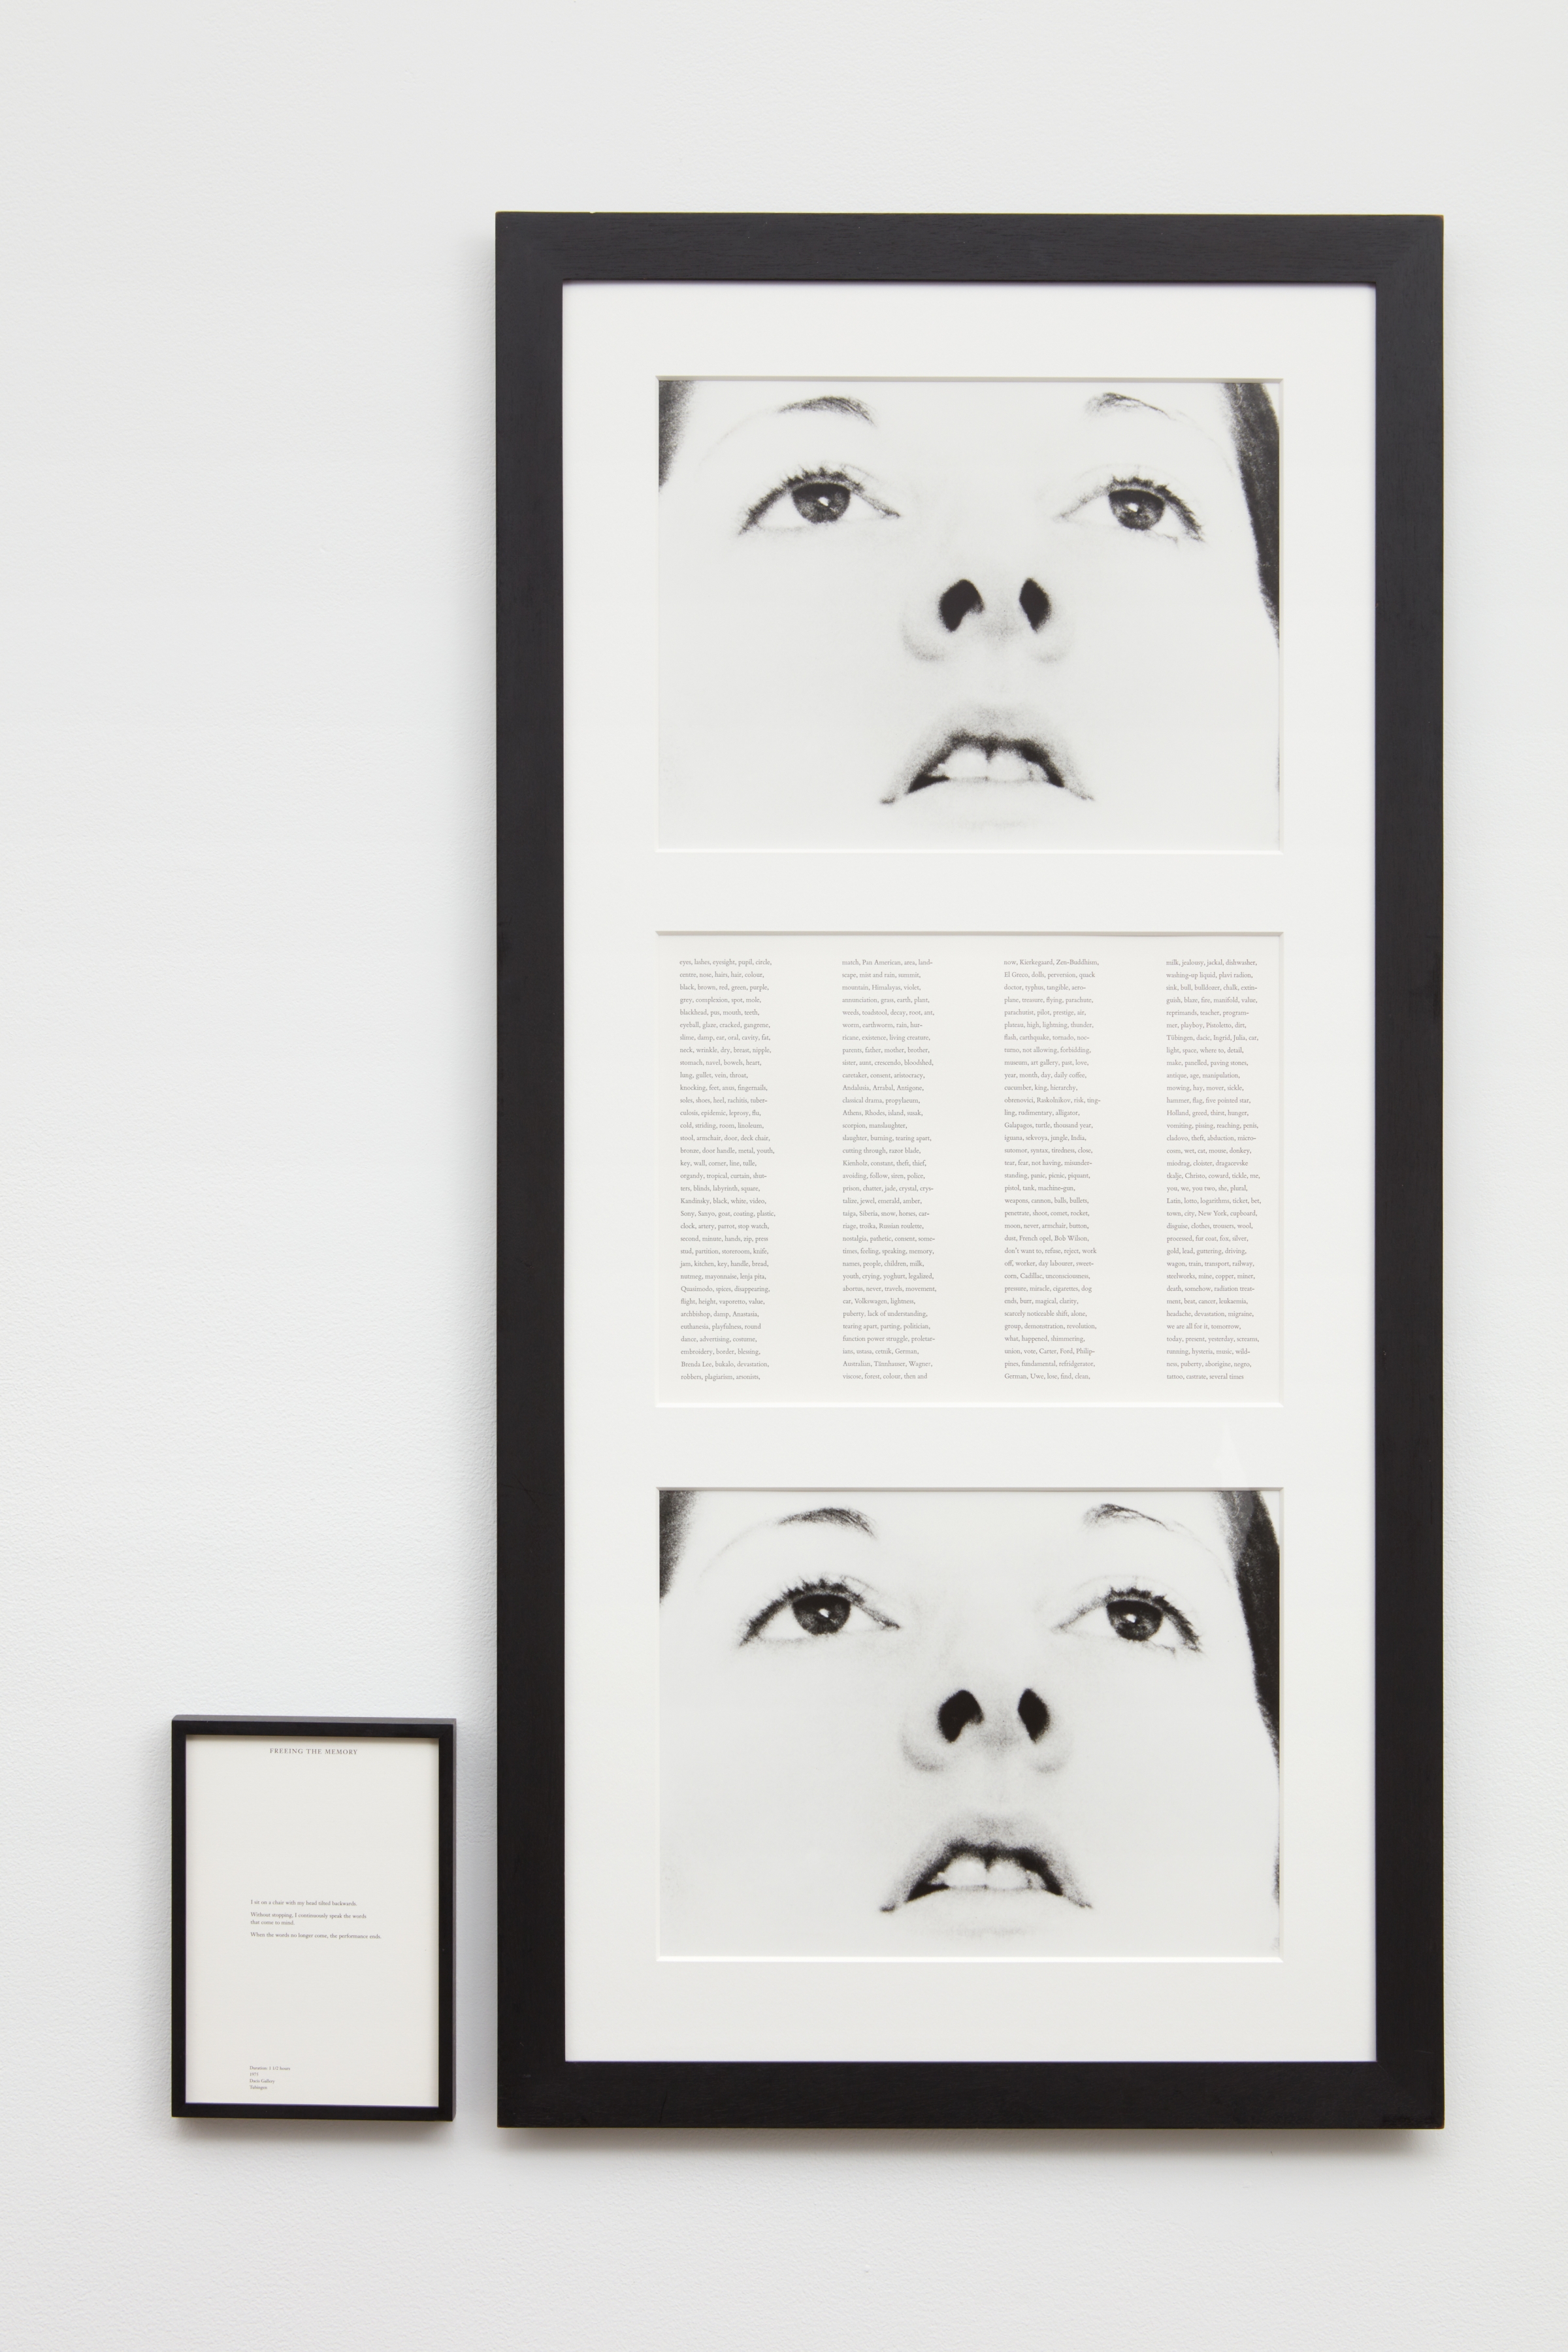 Marina Abramović, Freeing the Memory, 1975/1994, 2 black and white photographs with 2 letter press text panels, framed: 49 3/4 x 24 inches, text framed: 10 1/4 x 7 1/4 inches, edition of 16 with 3 APs.